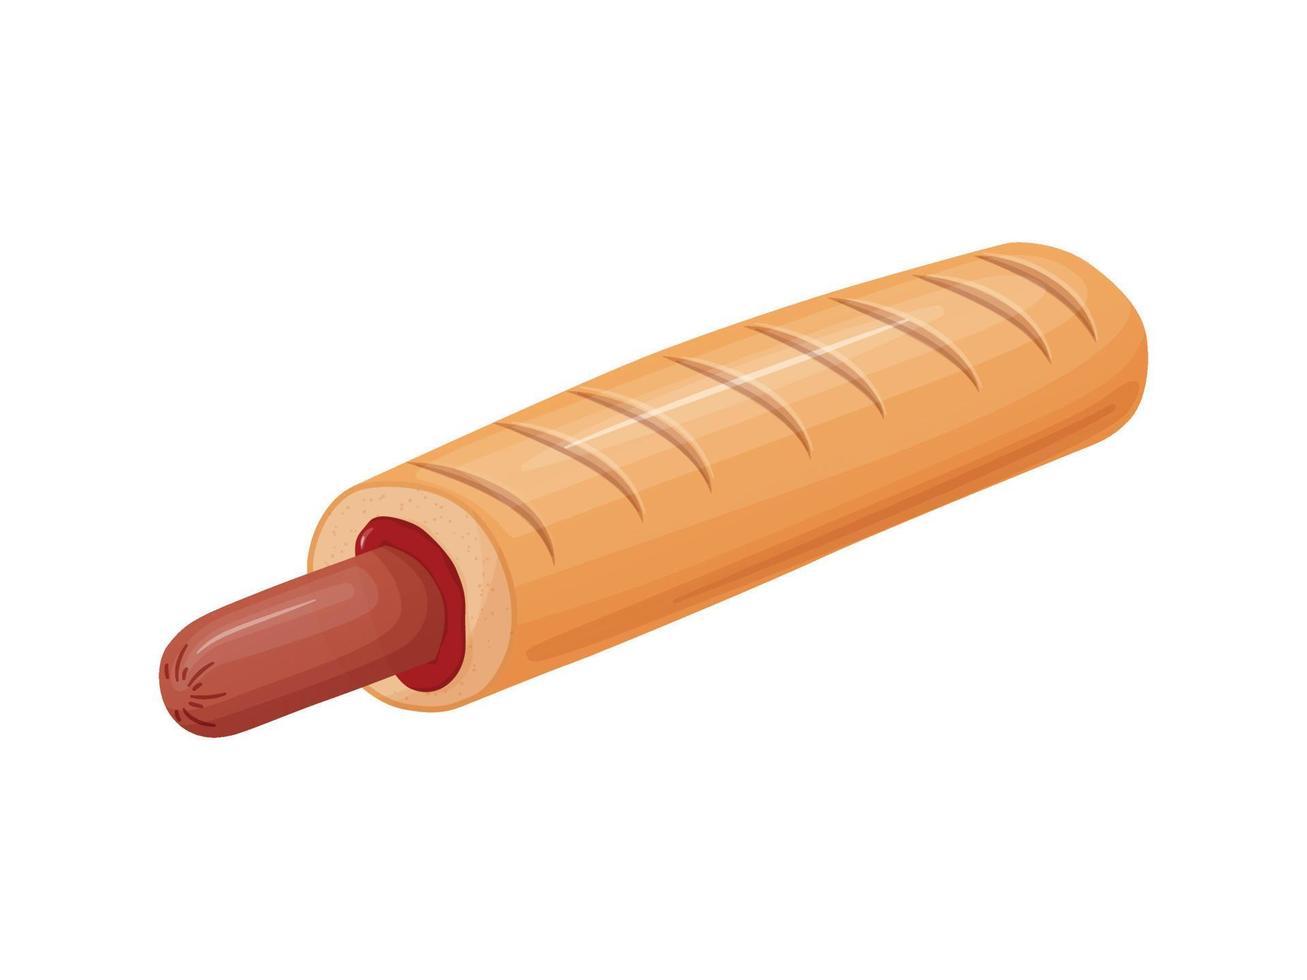 French Hot Dog. Illustration fast food in cartoon style. Sausage in a bun with ketchup. vector